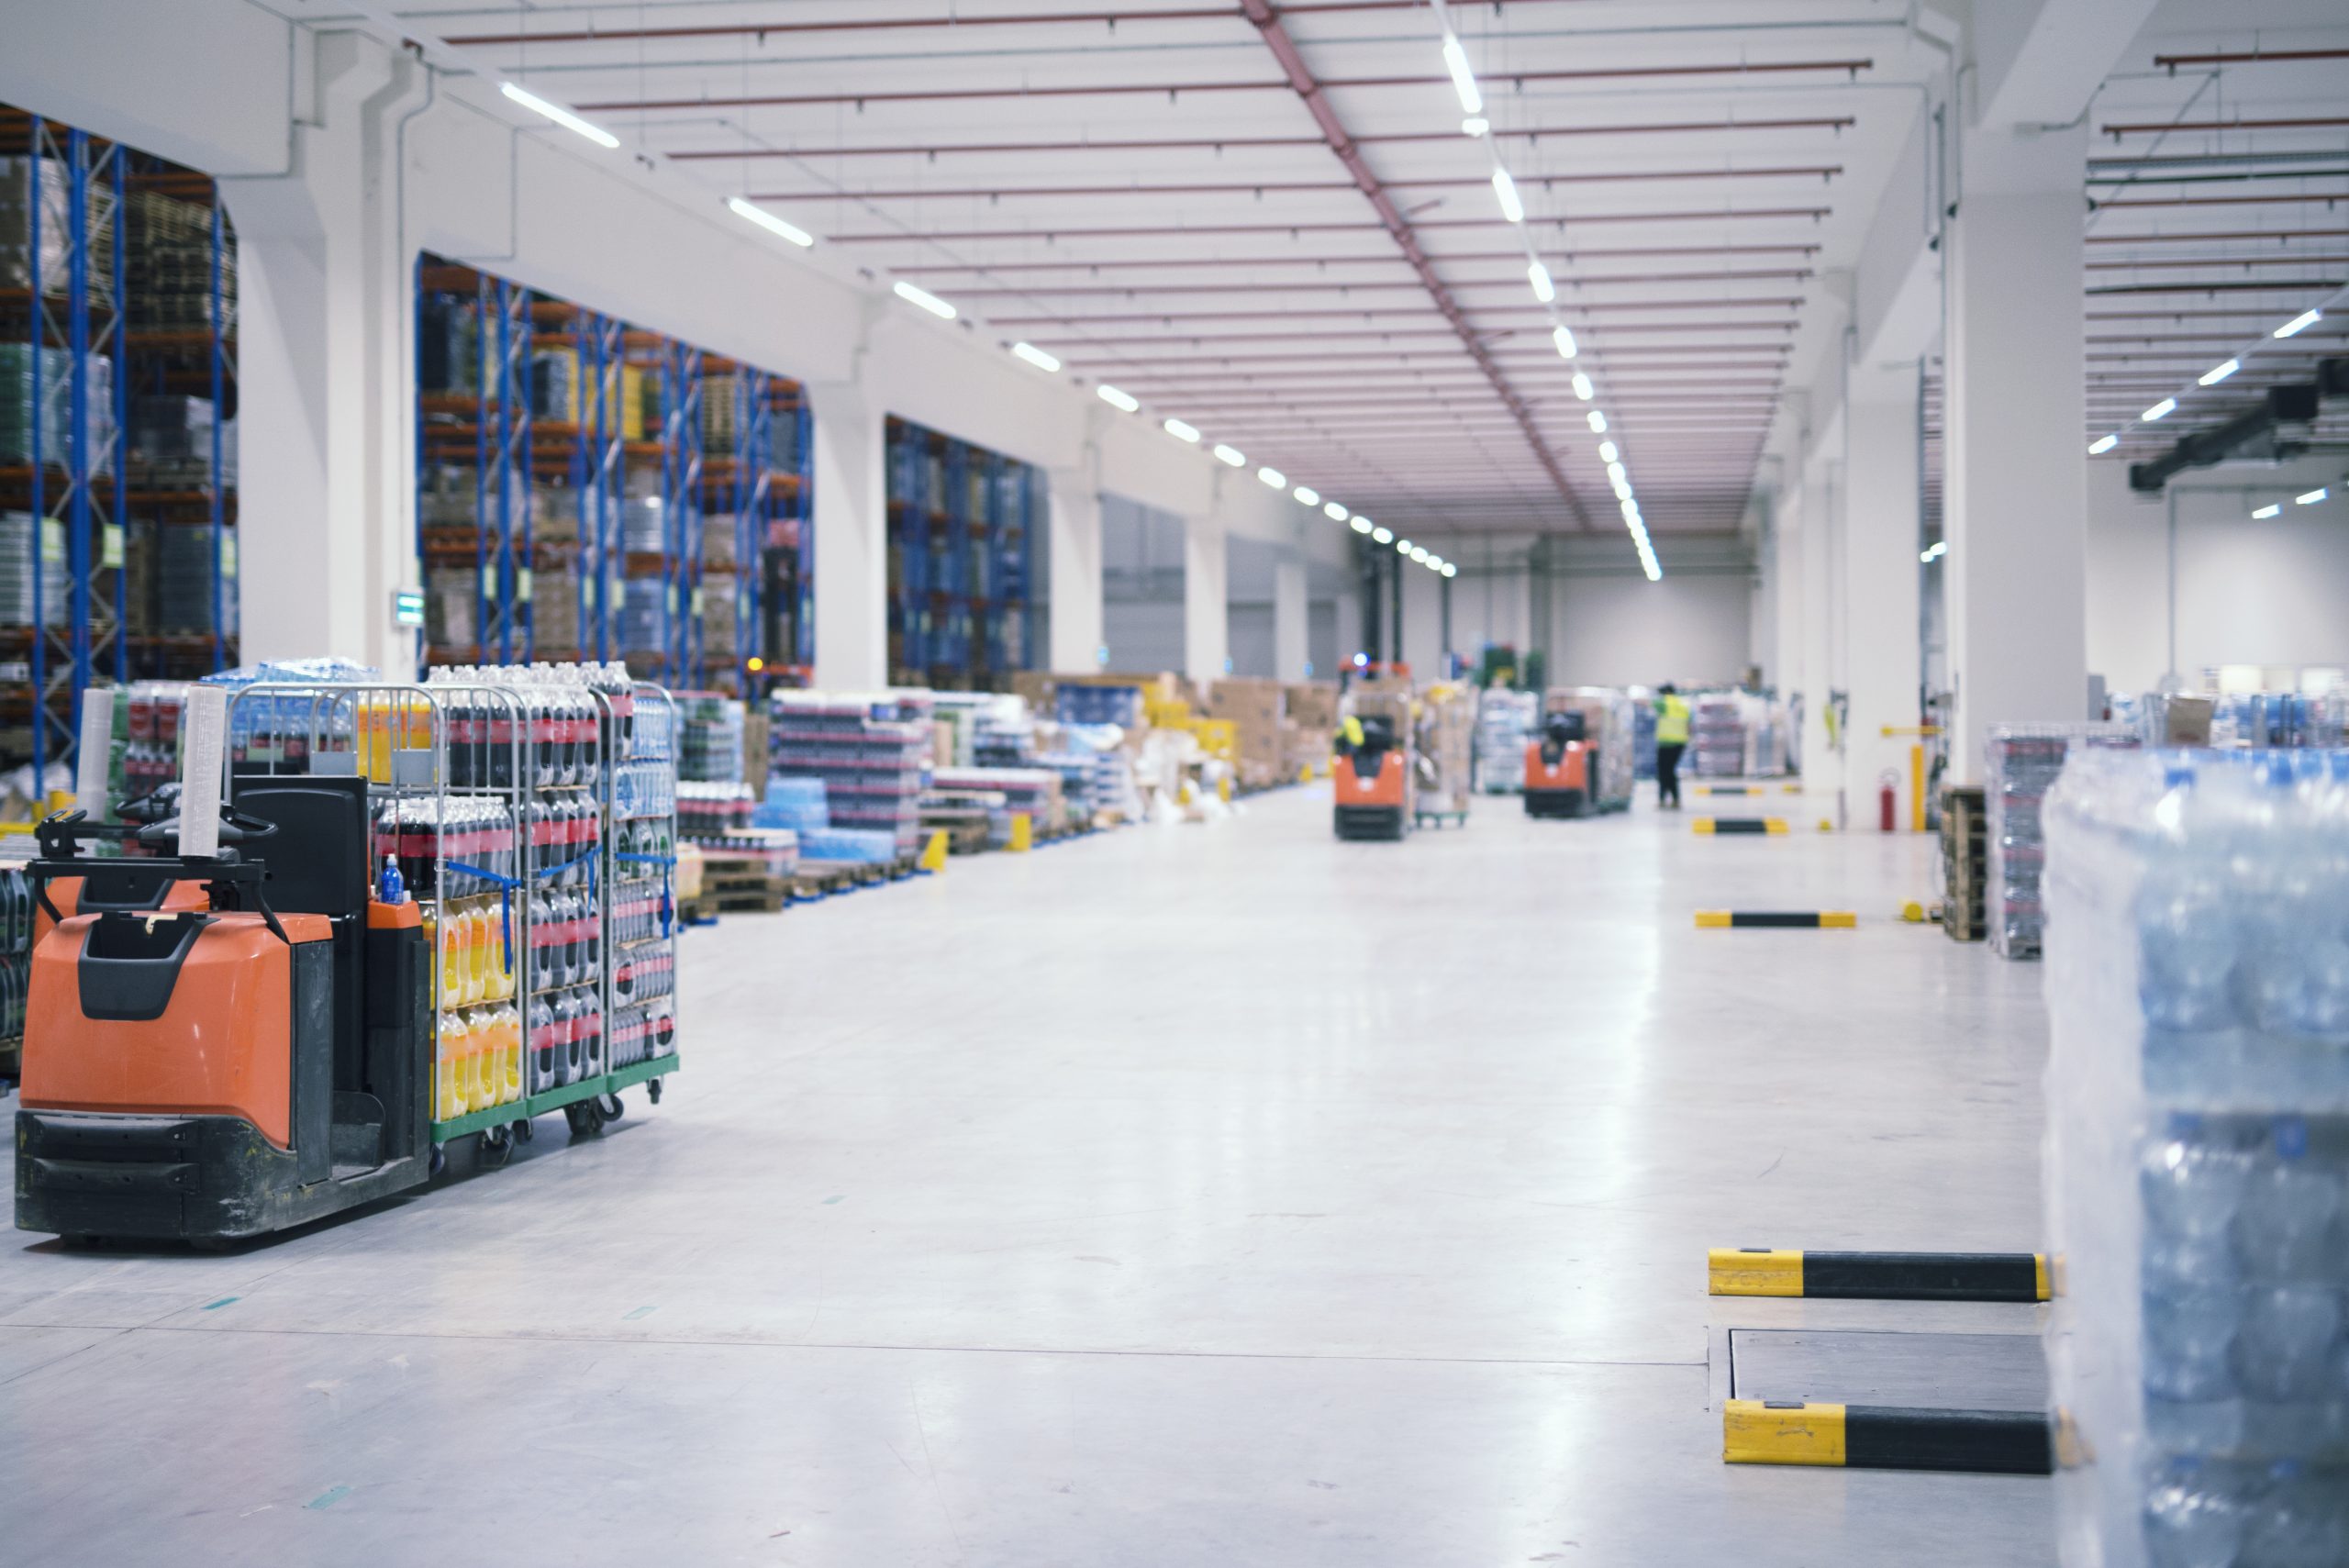 Warehouse industrial building interior with people and forklifts handling goods in storage area.